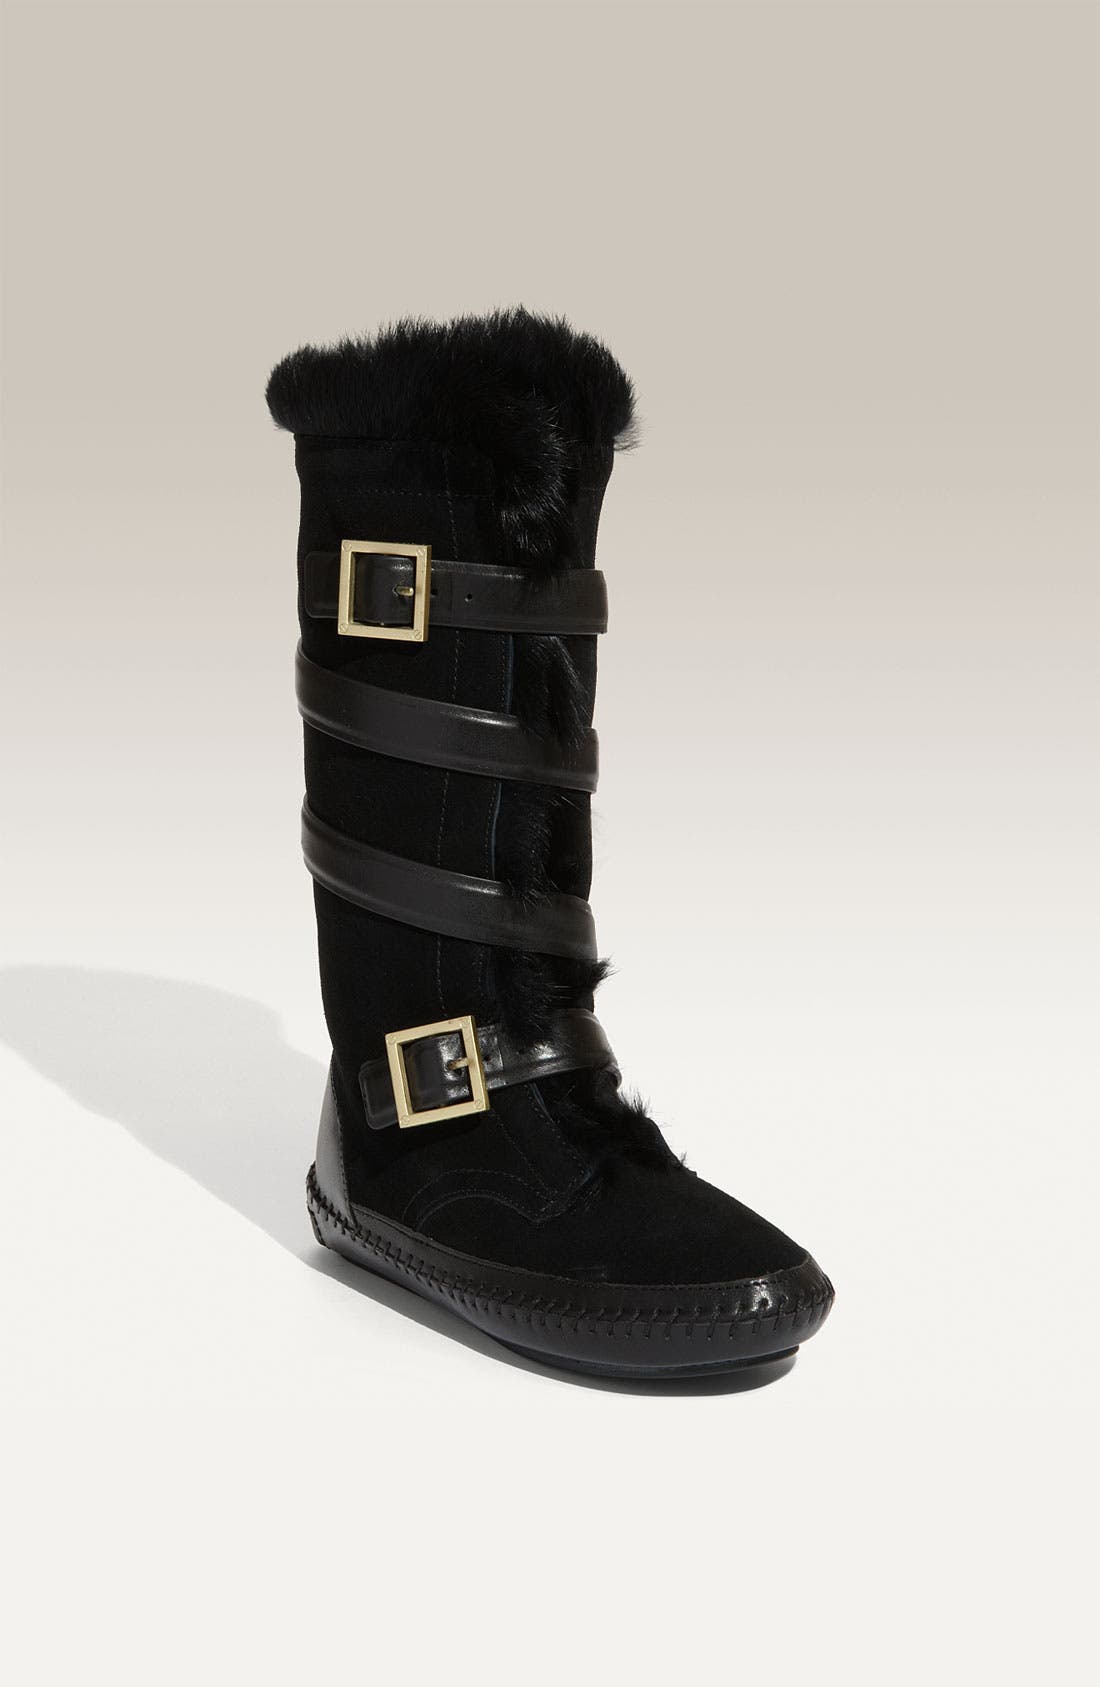 tory burch fur lined boots